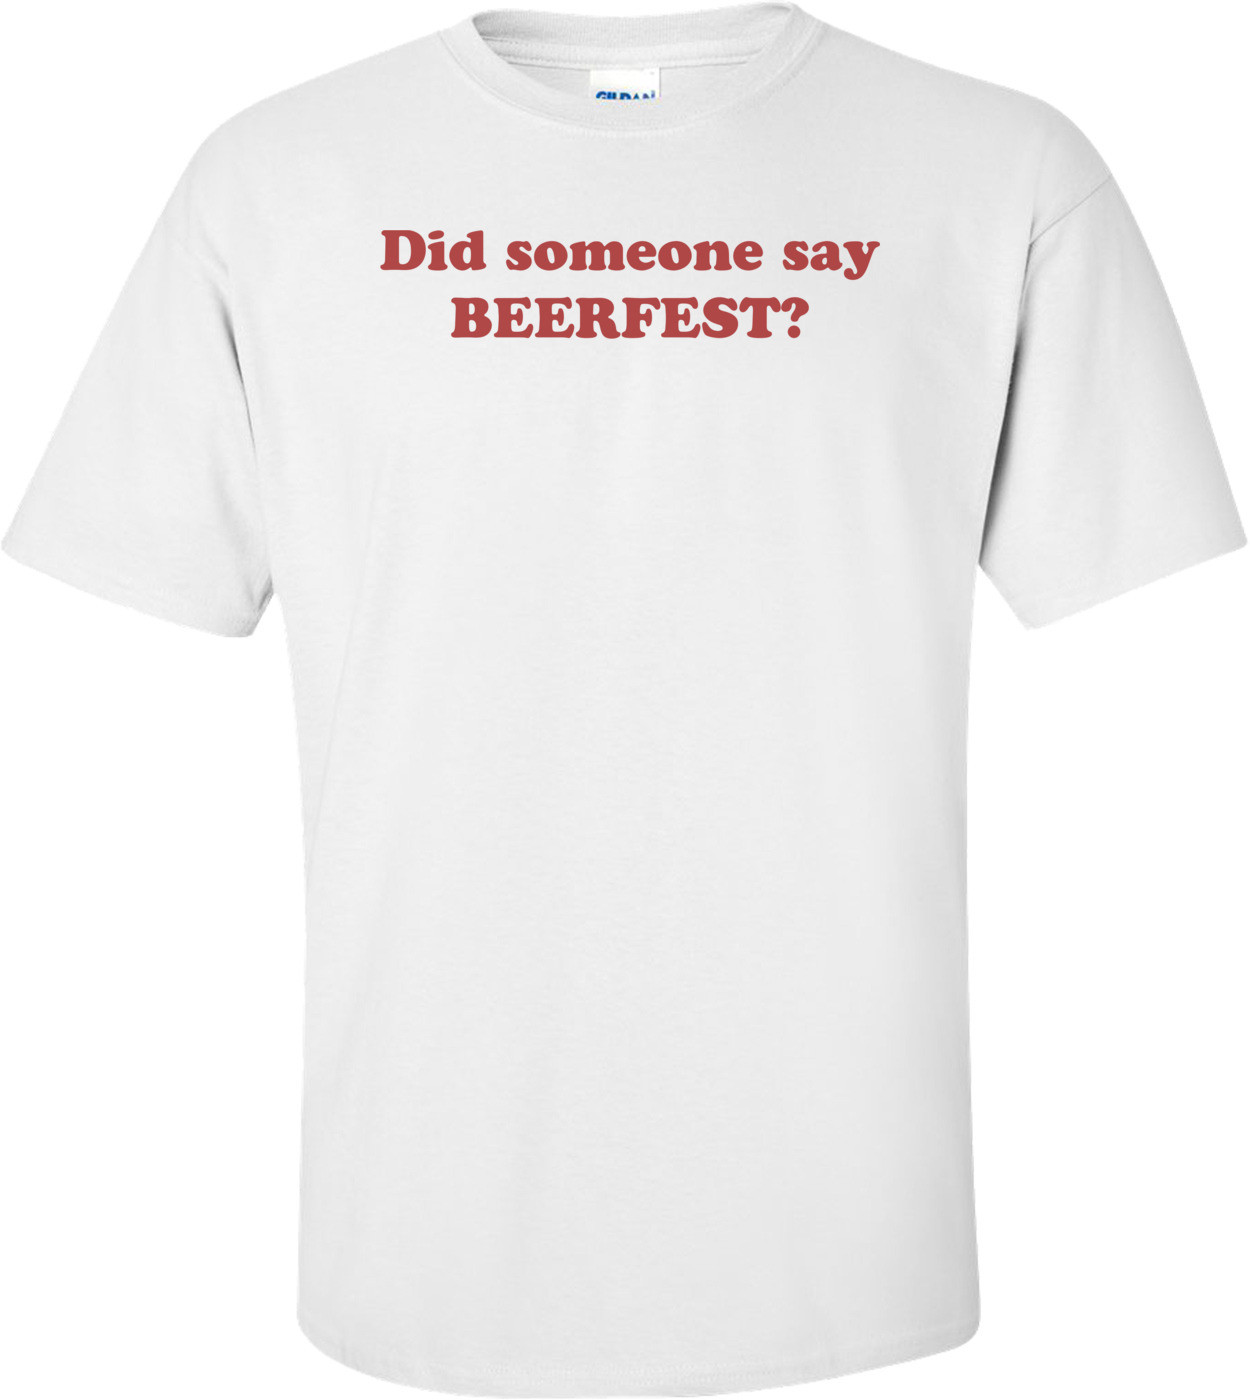 Did someone say BEERFEST?